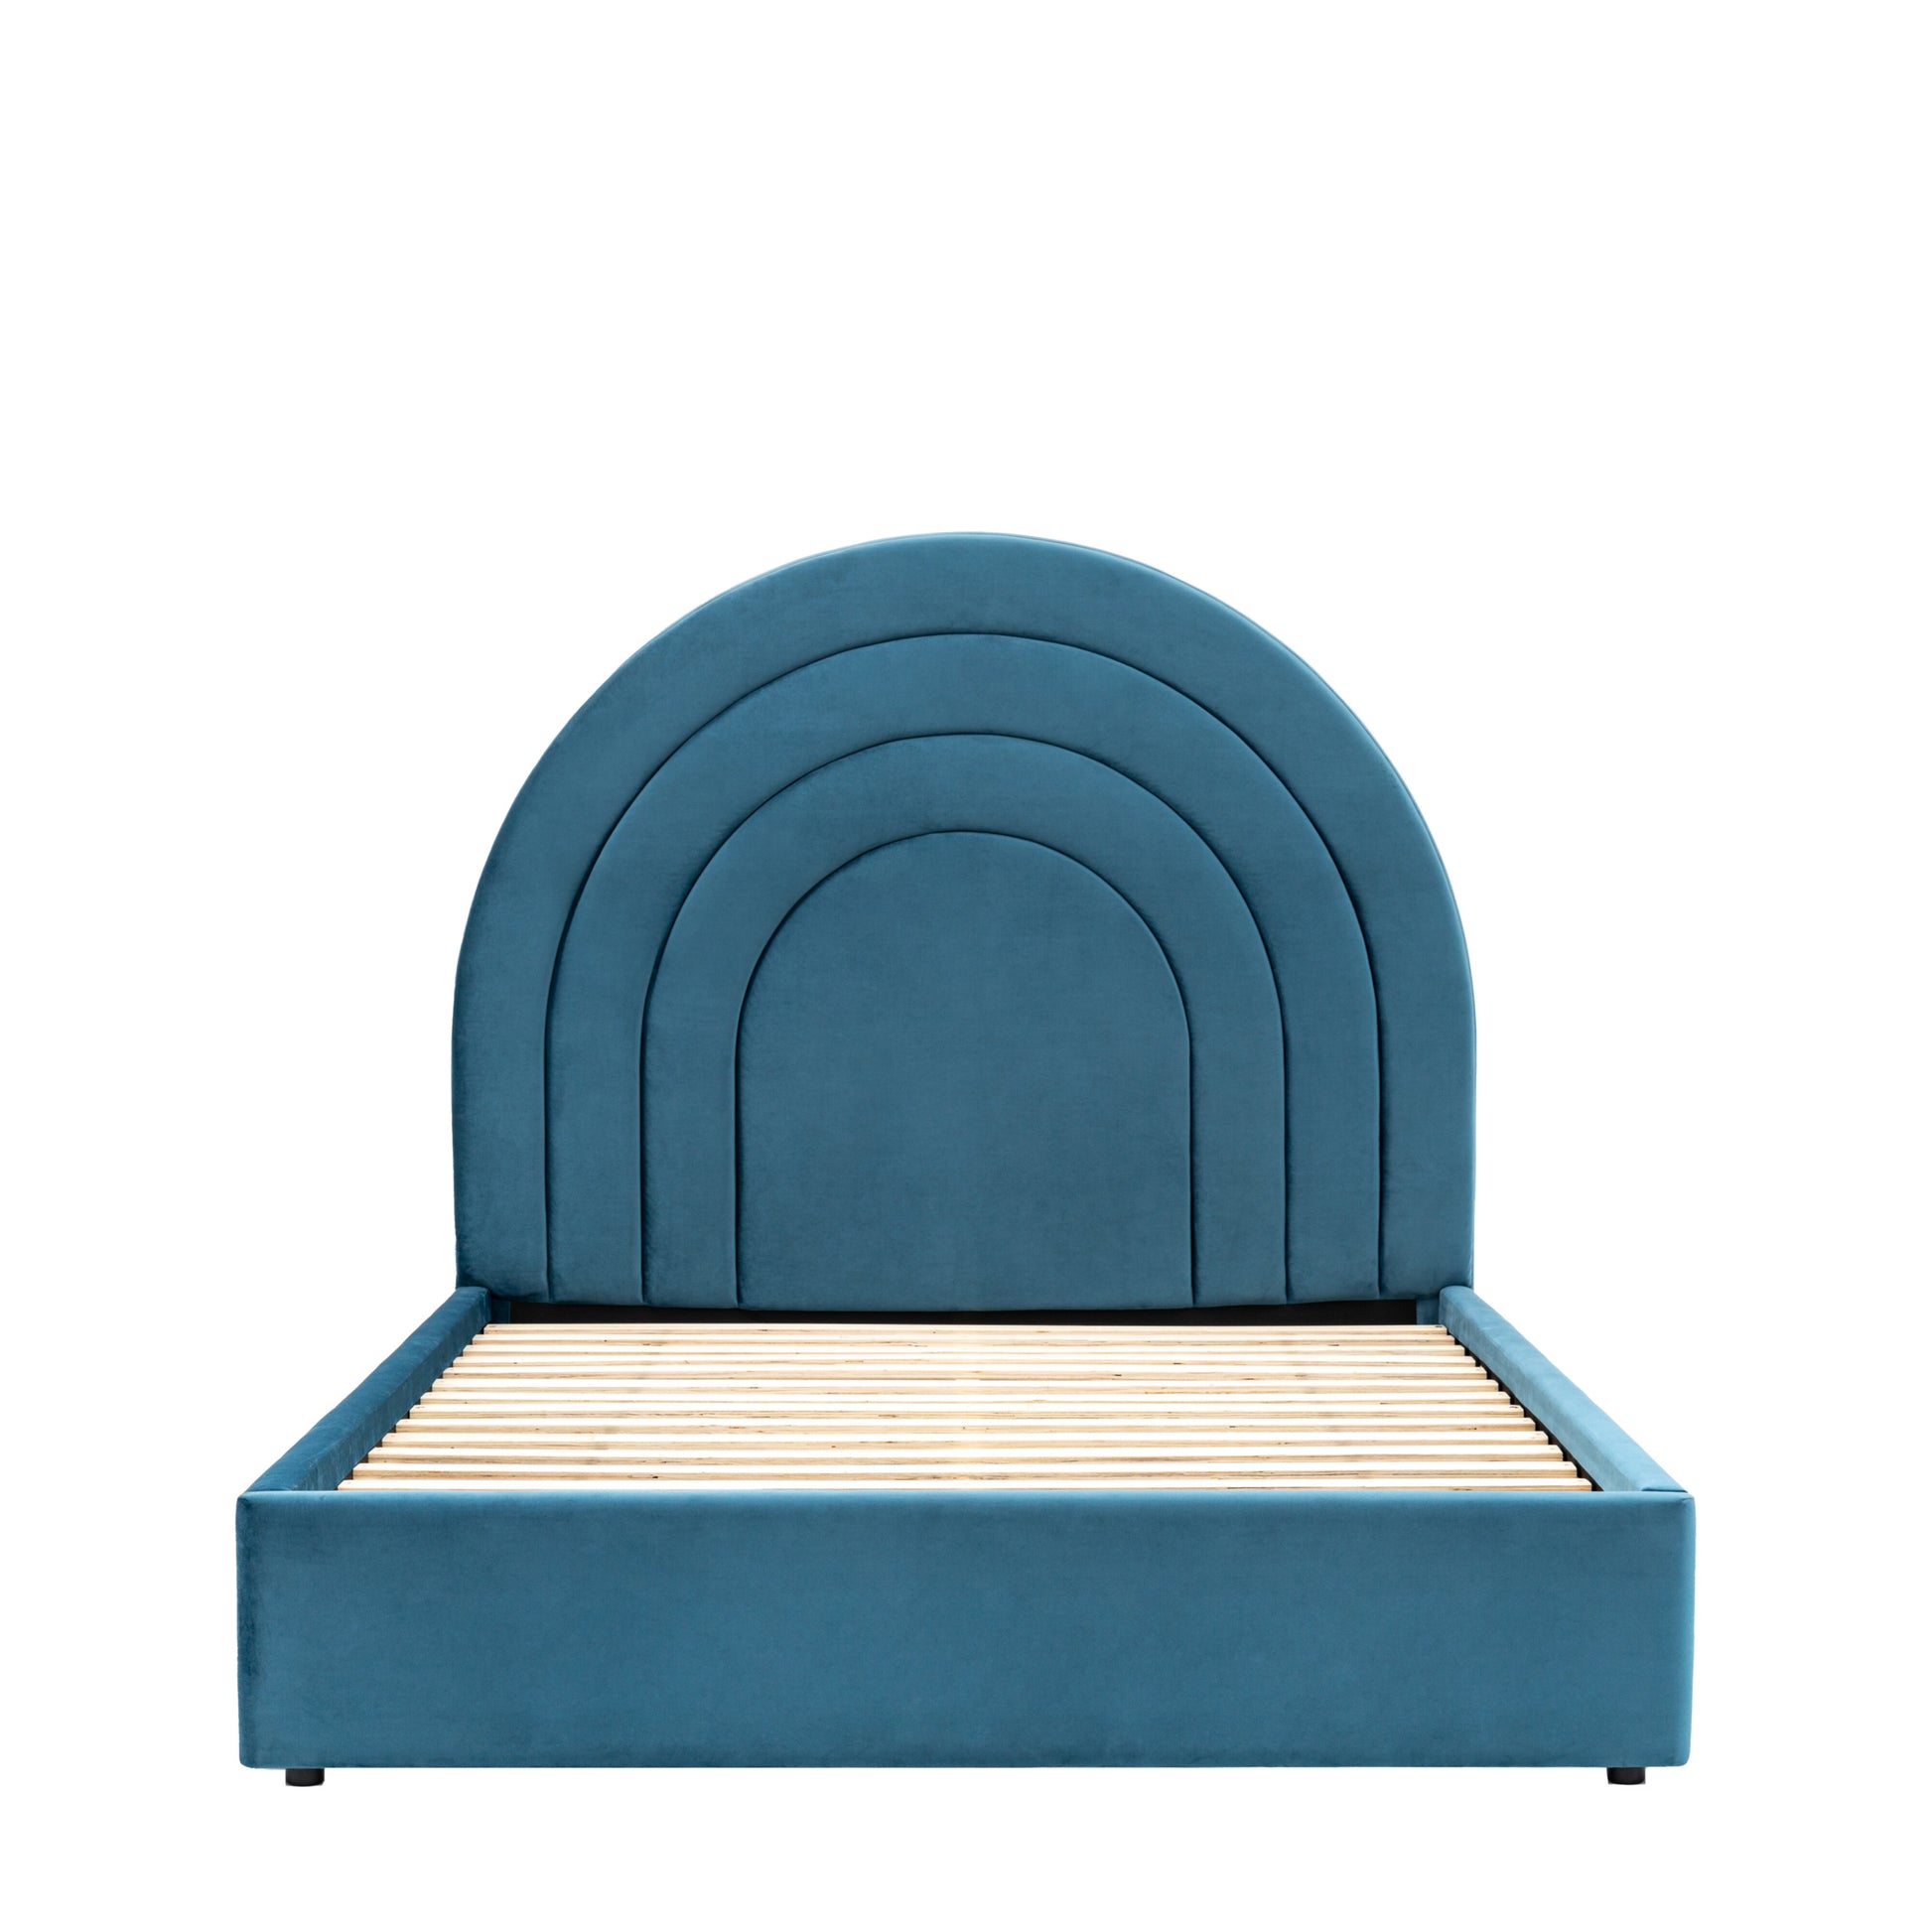 Arch King Size Bedstead | Kingfisher